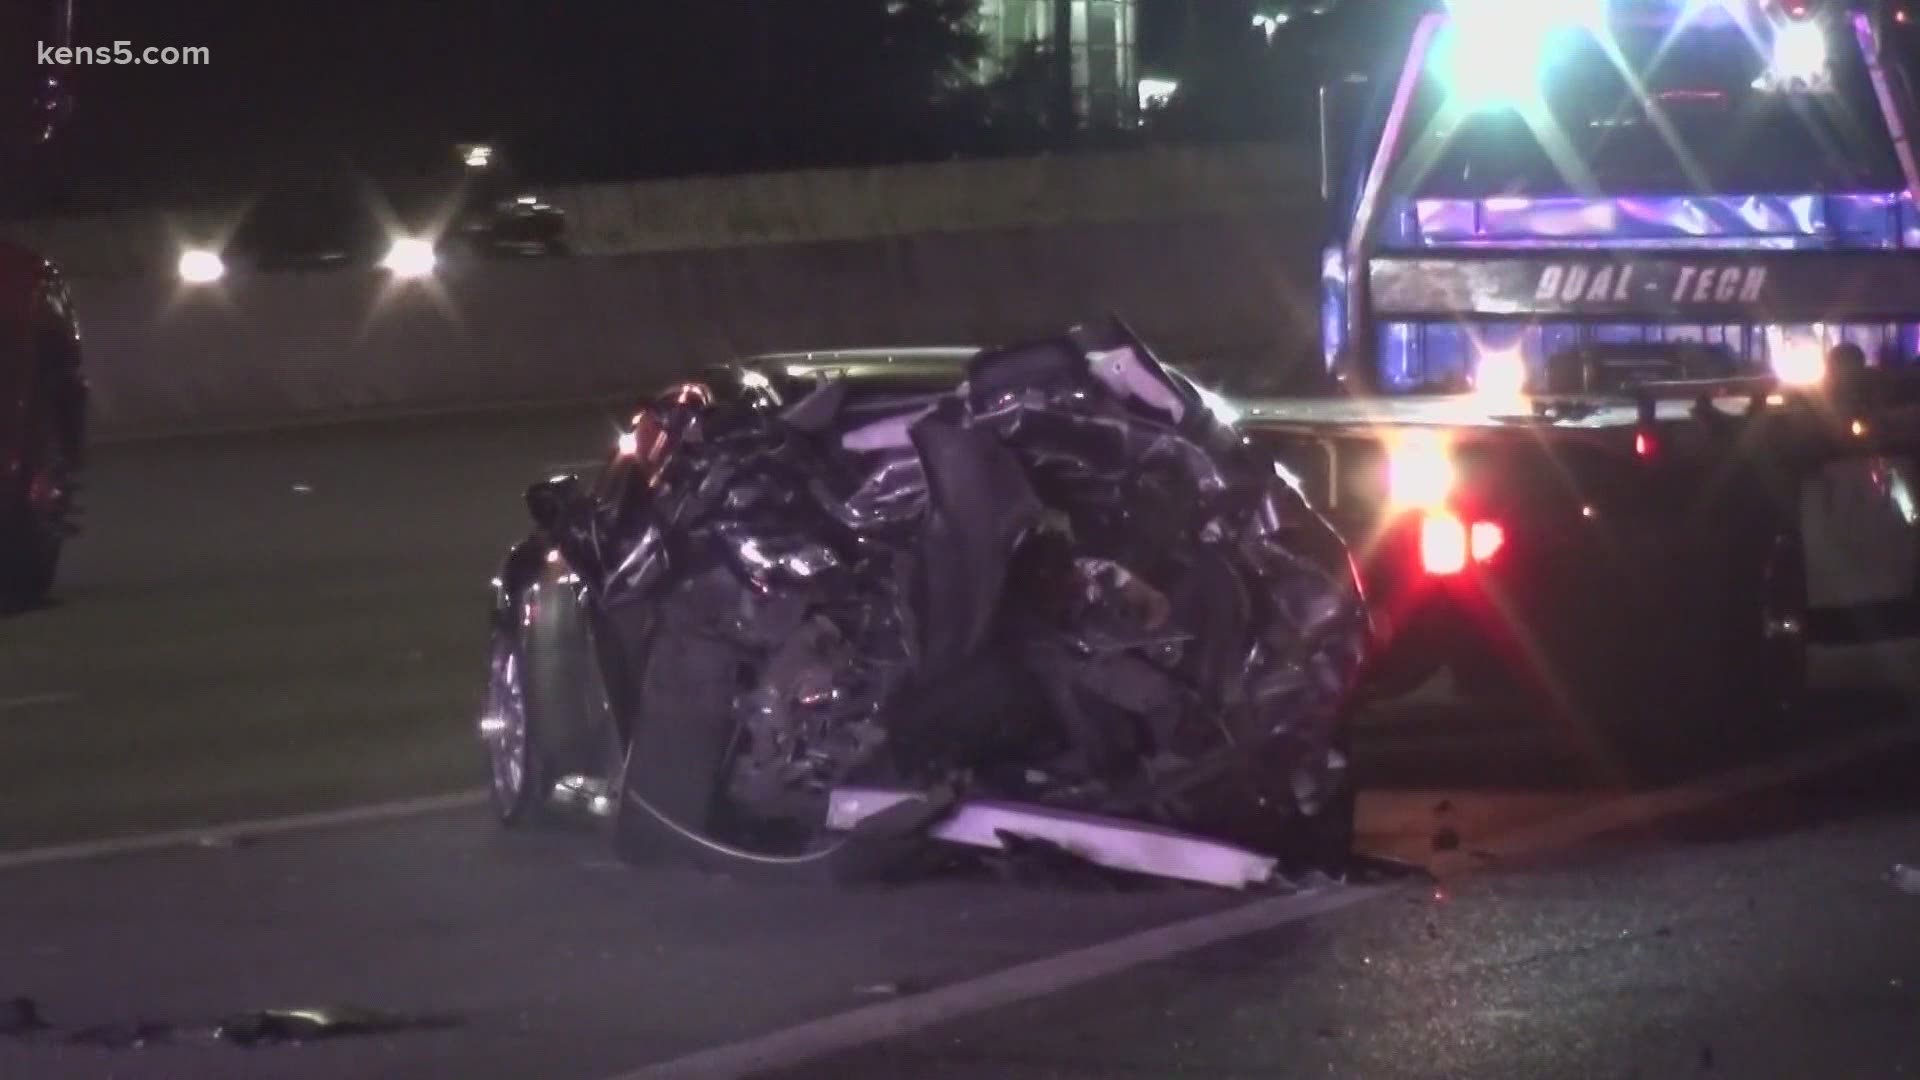 A seven-car pileup shuts down parts of Highway 281 overnight. San Antonio Police believe a drunk driver was responsible for the chain reaction of crashes.